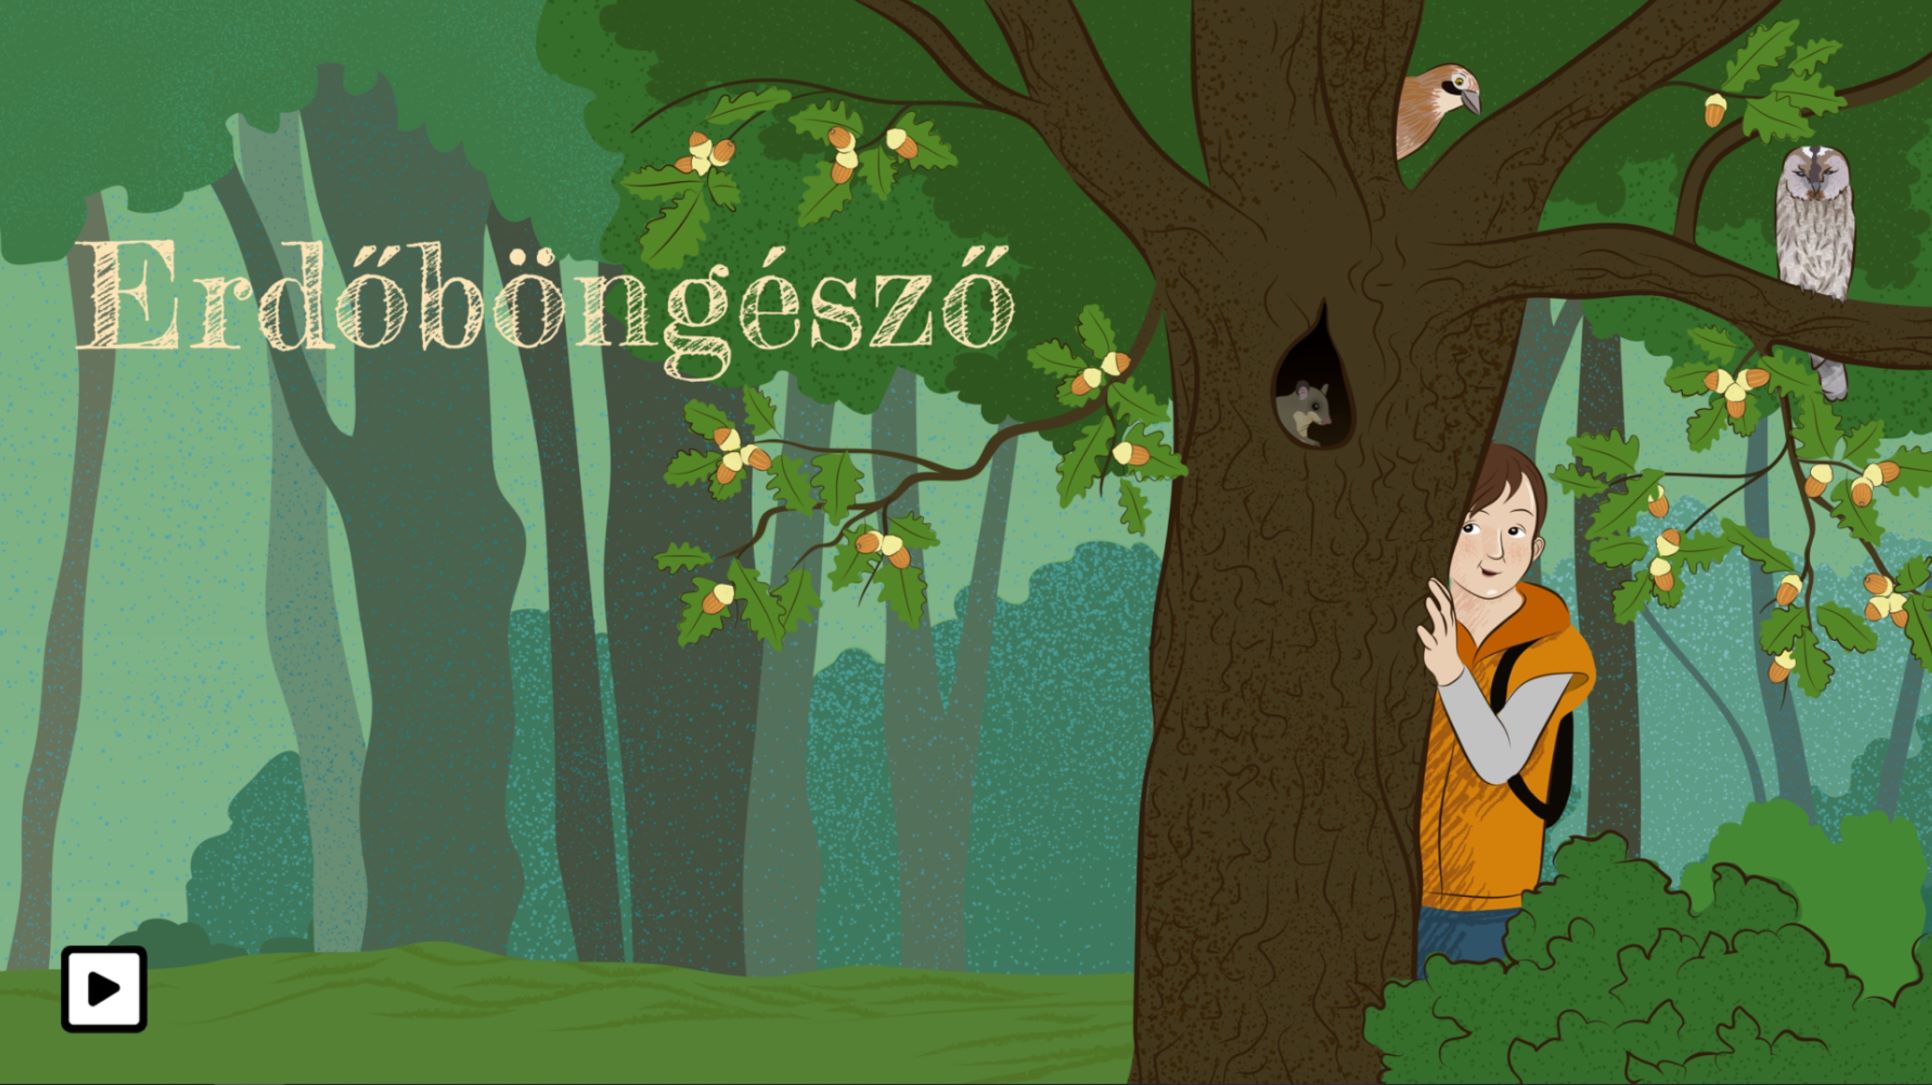 Online version of Erdőböngésző is out to celebrate the Day of Birds and Trees